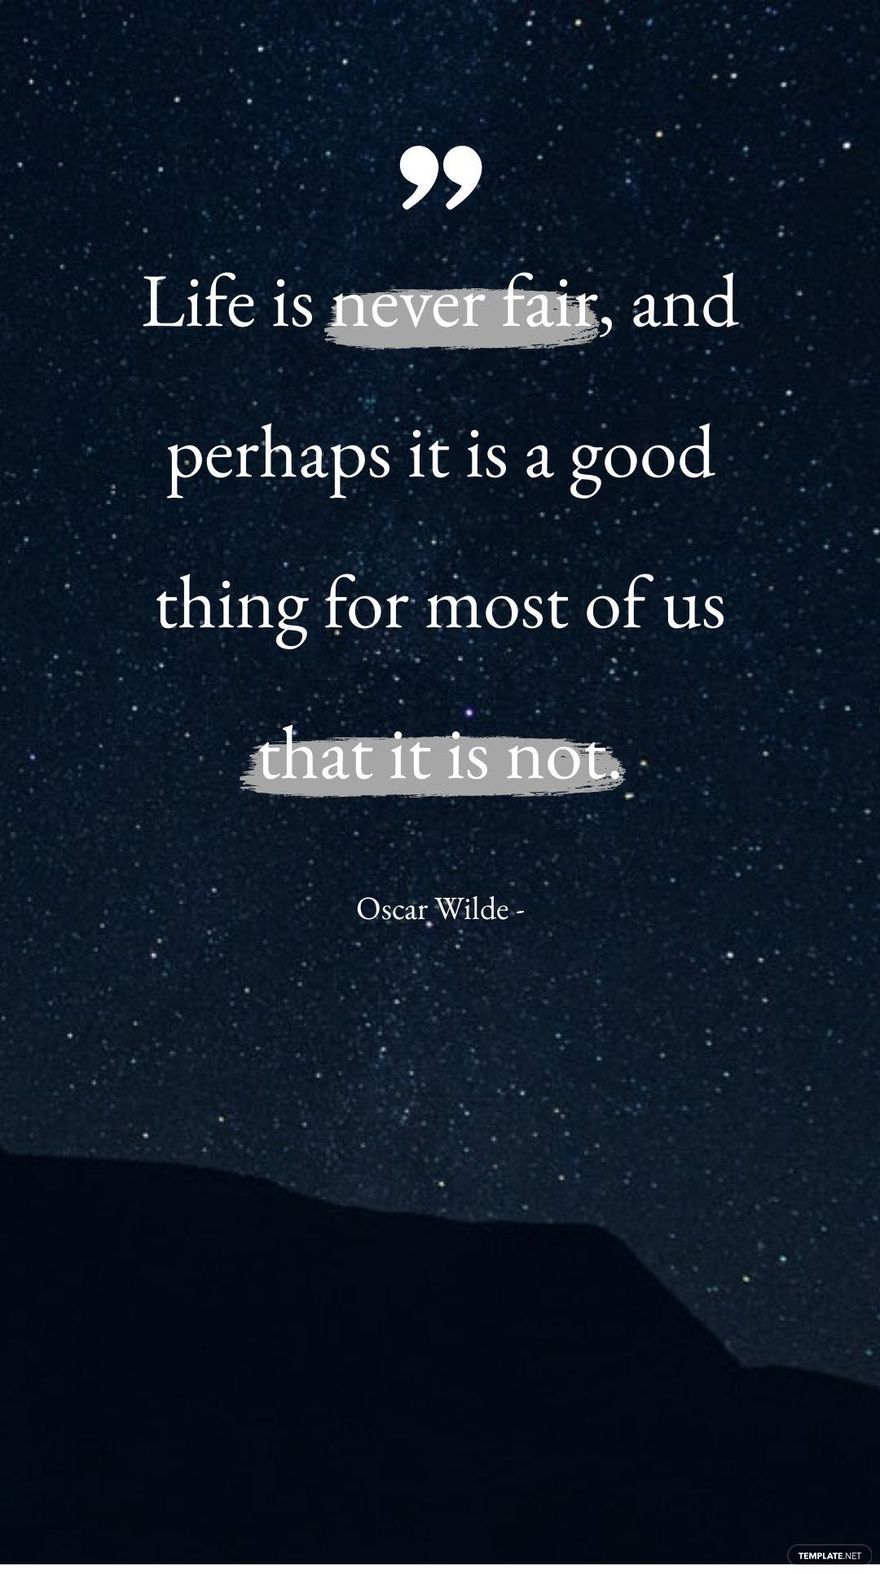 Oscar Wilde - Life is never fair, and perhaps it is a good thing for most of us that it is not.